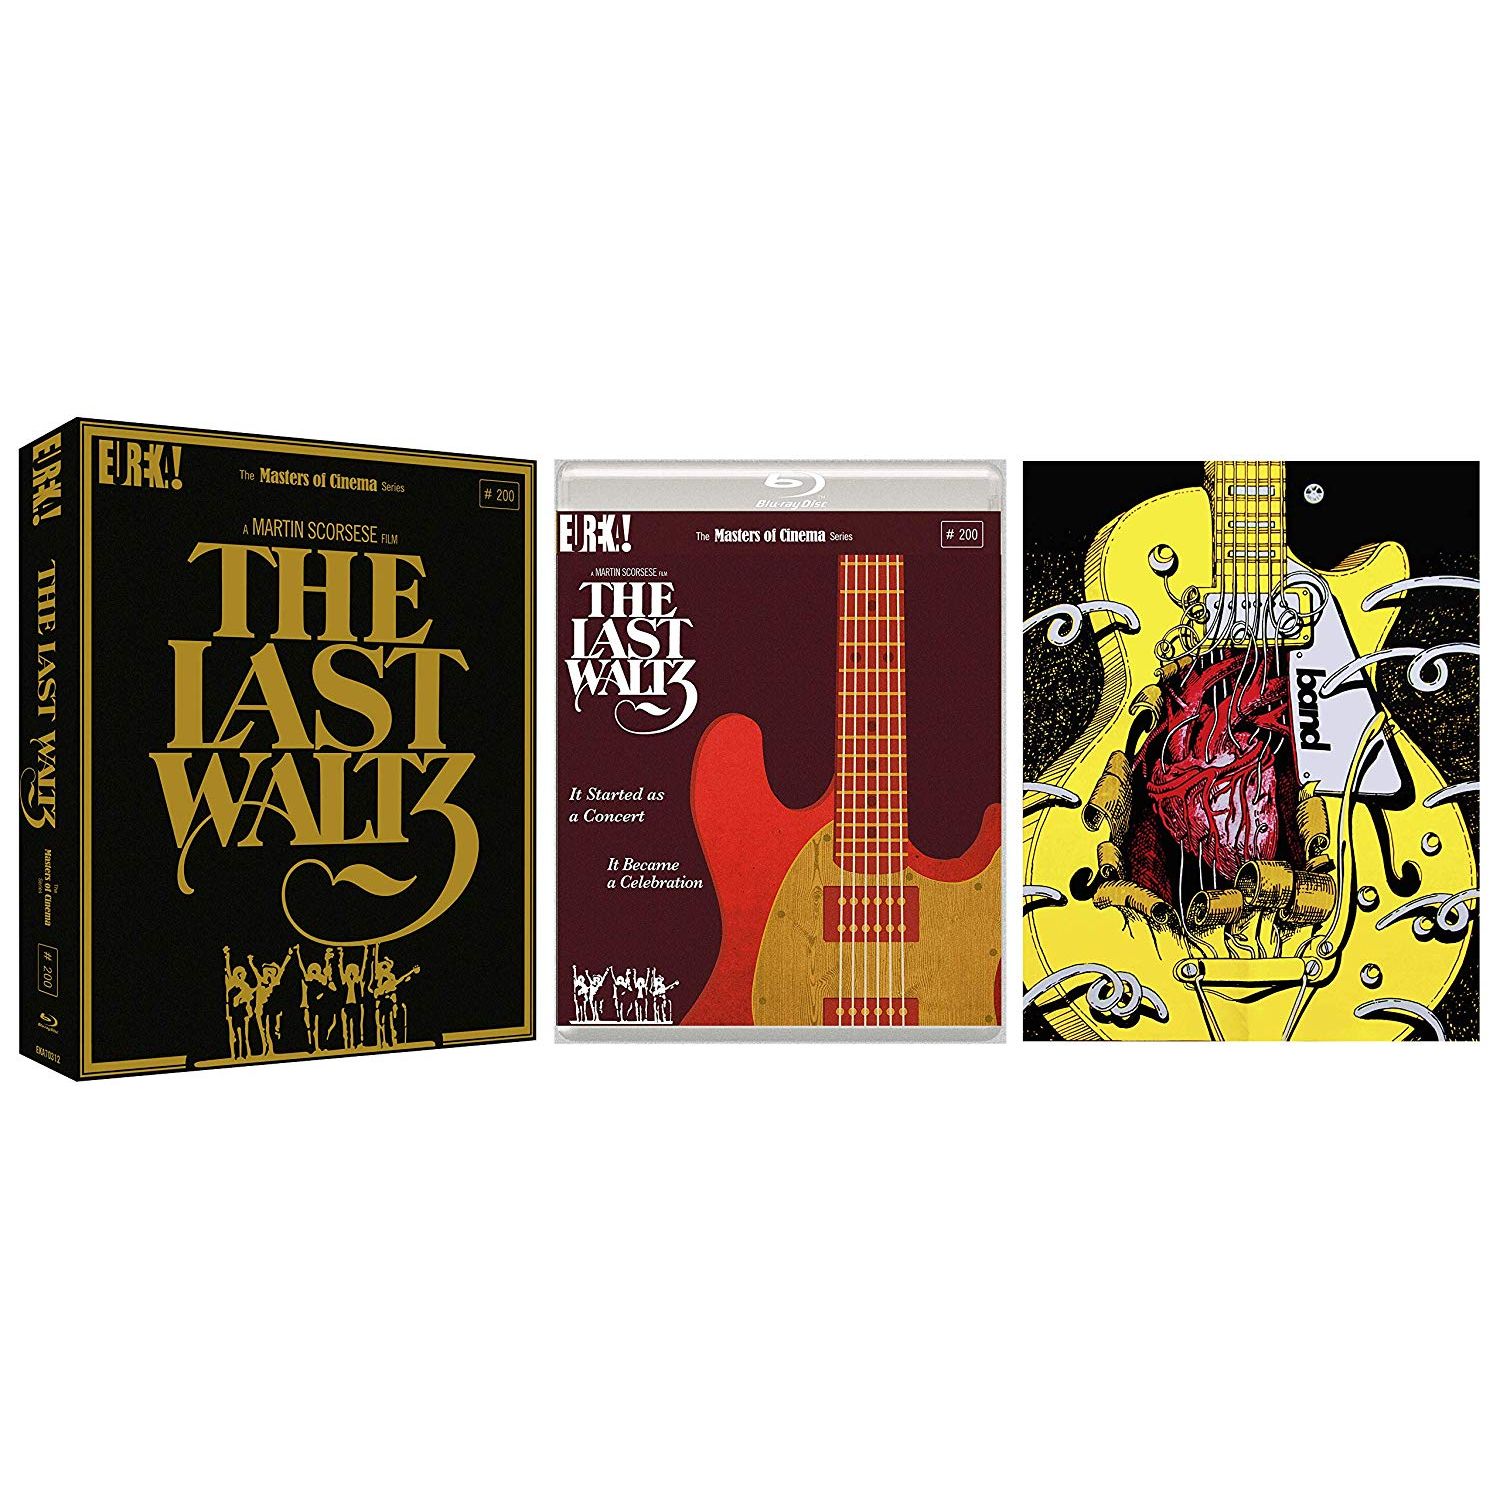 THE BAND / ザ・バンド / THE LAST WALTZ [THE MASTERS OF CINEMA SERIES] (LIMITED EDITION BLU-RAY)